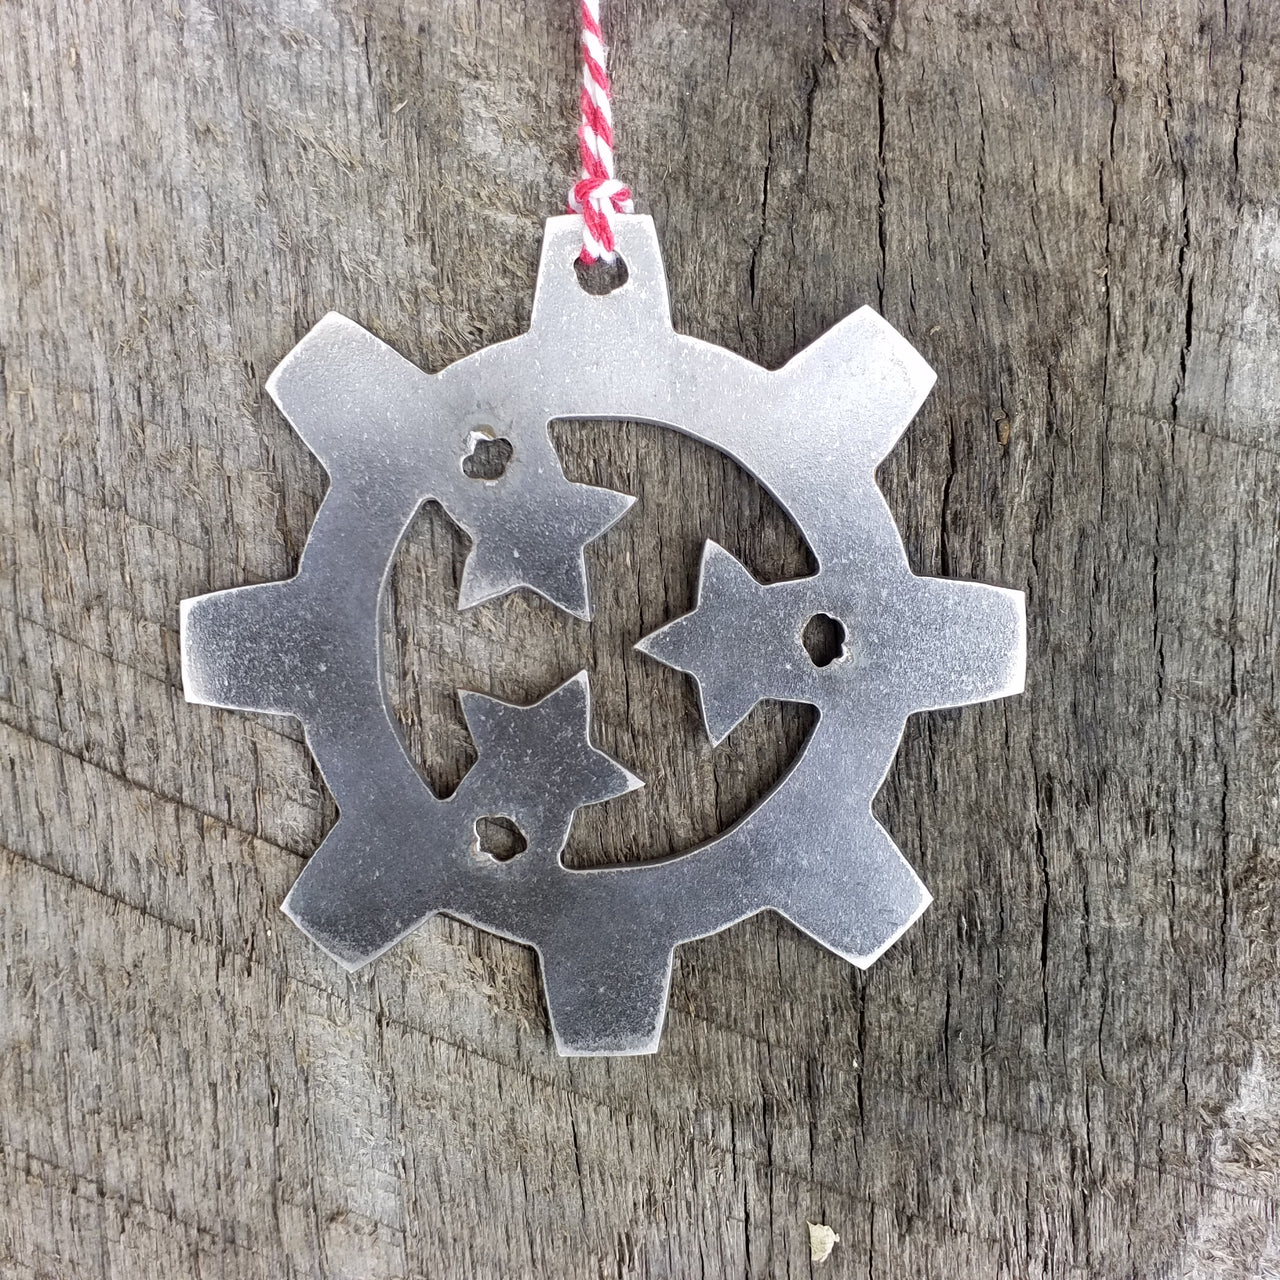 Gear Tristar Christmas Ornament - FREE SHIPPING, Stocking Stuffer, Holiday Gift, Tree, Tennessee